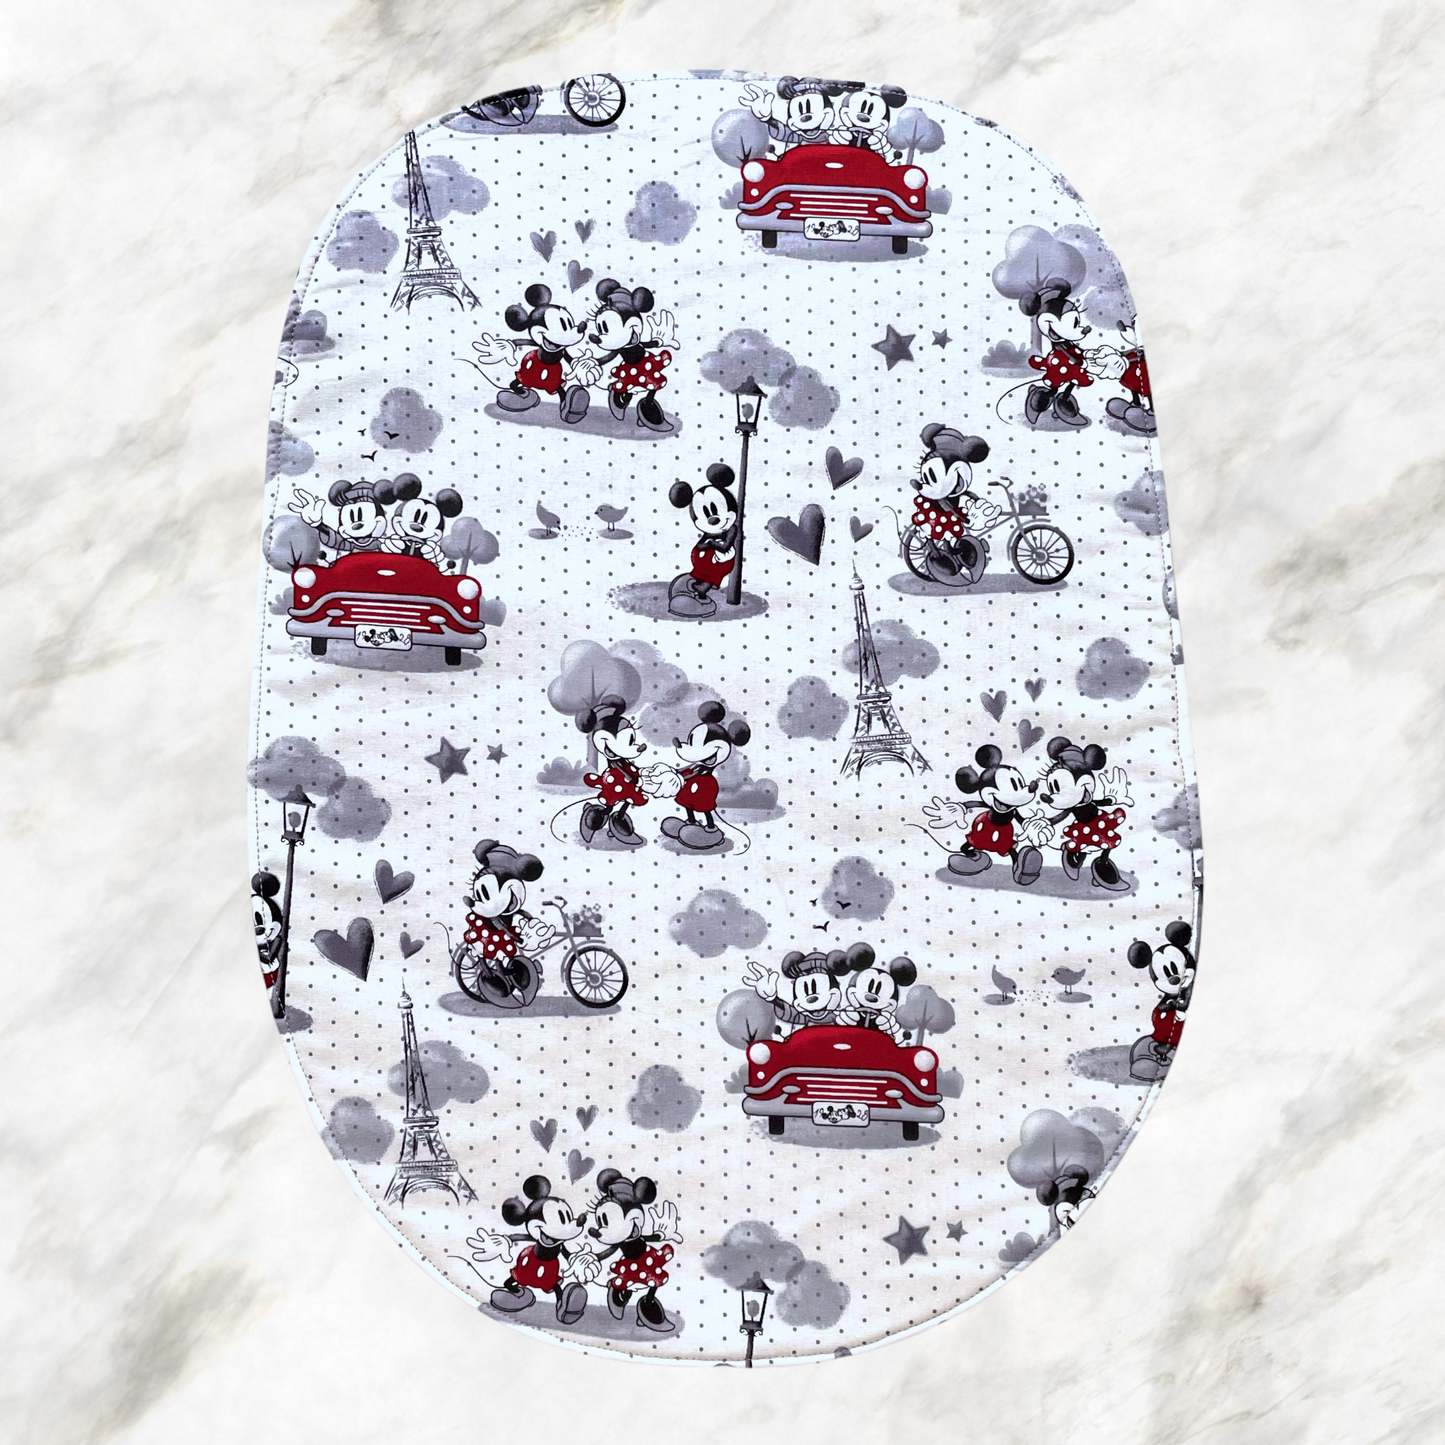 Stand Mixer Slider Mat - Retro Mickey and Minnie Mouse Paris Fabric